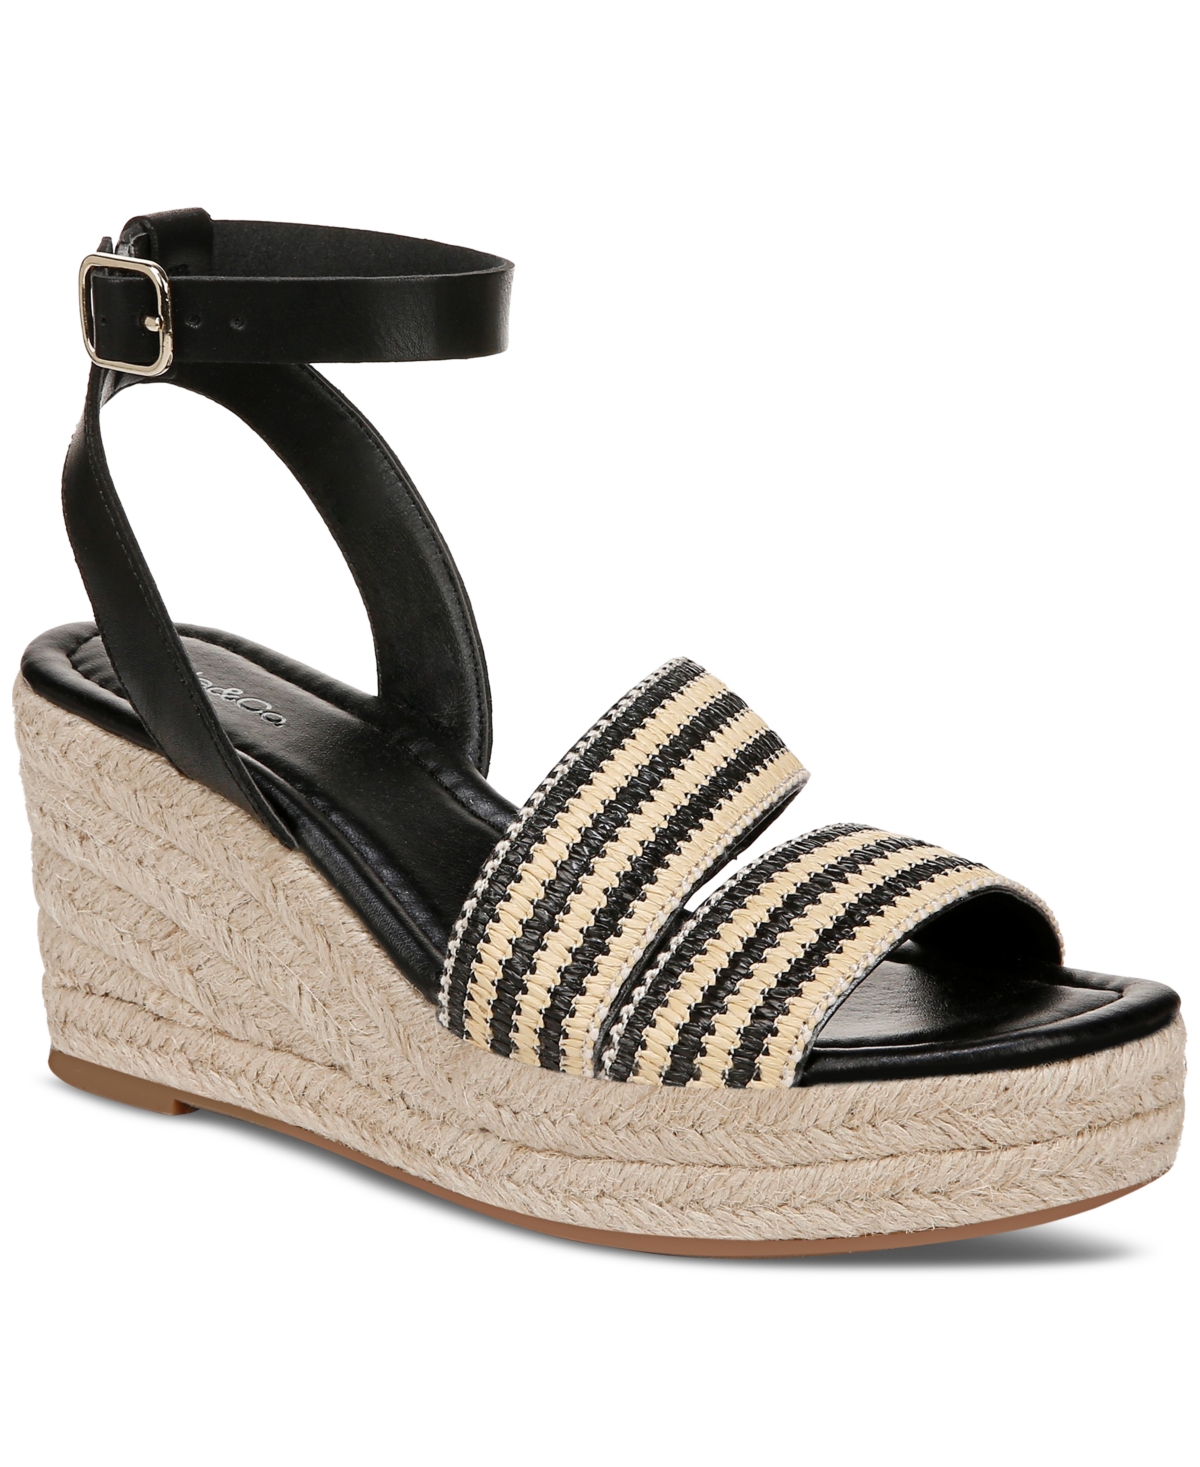 Ceicillaa Strappy Woven Wedge Sandals, Created for Macy's - Berry Multi Crochet